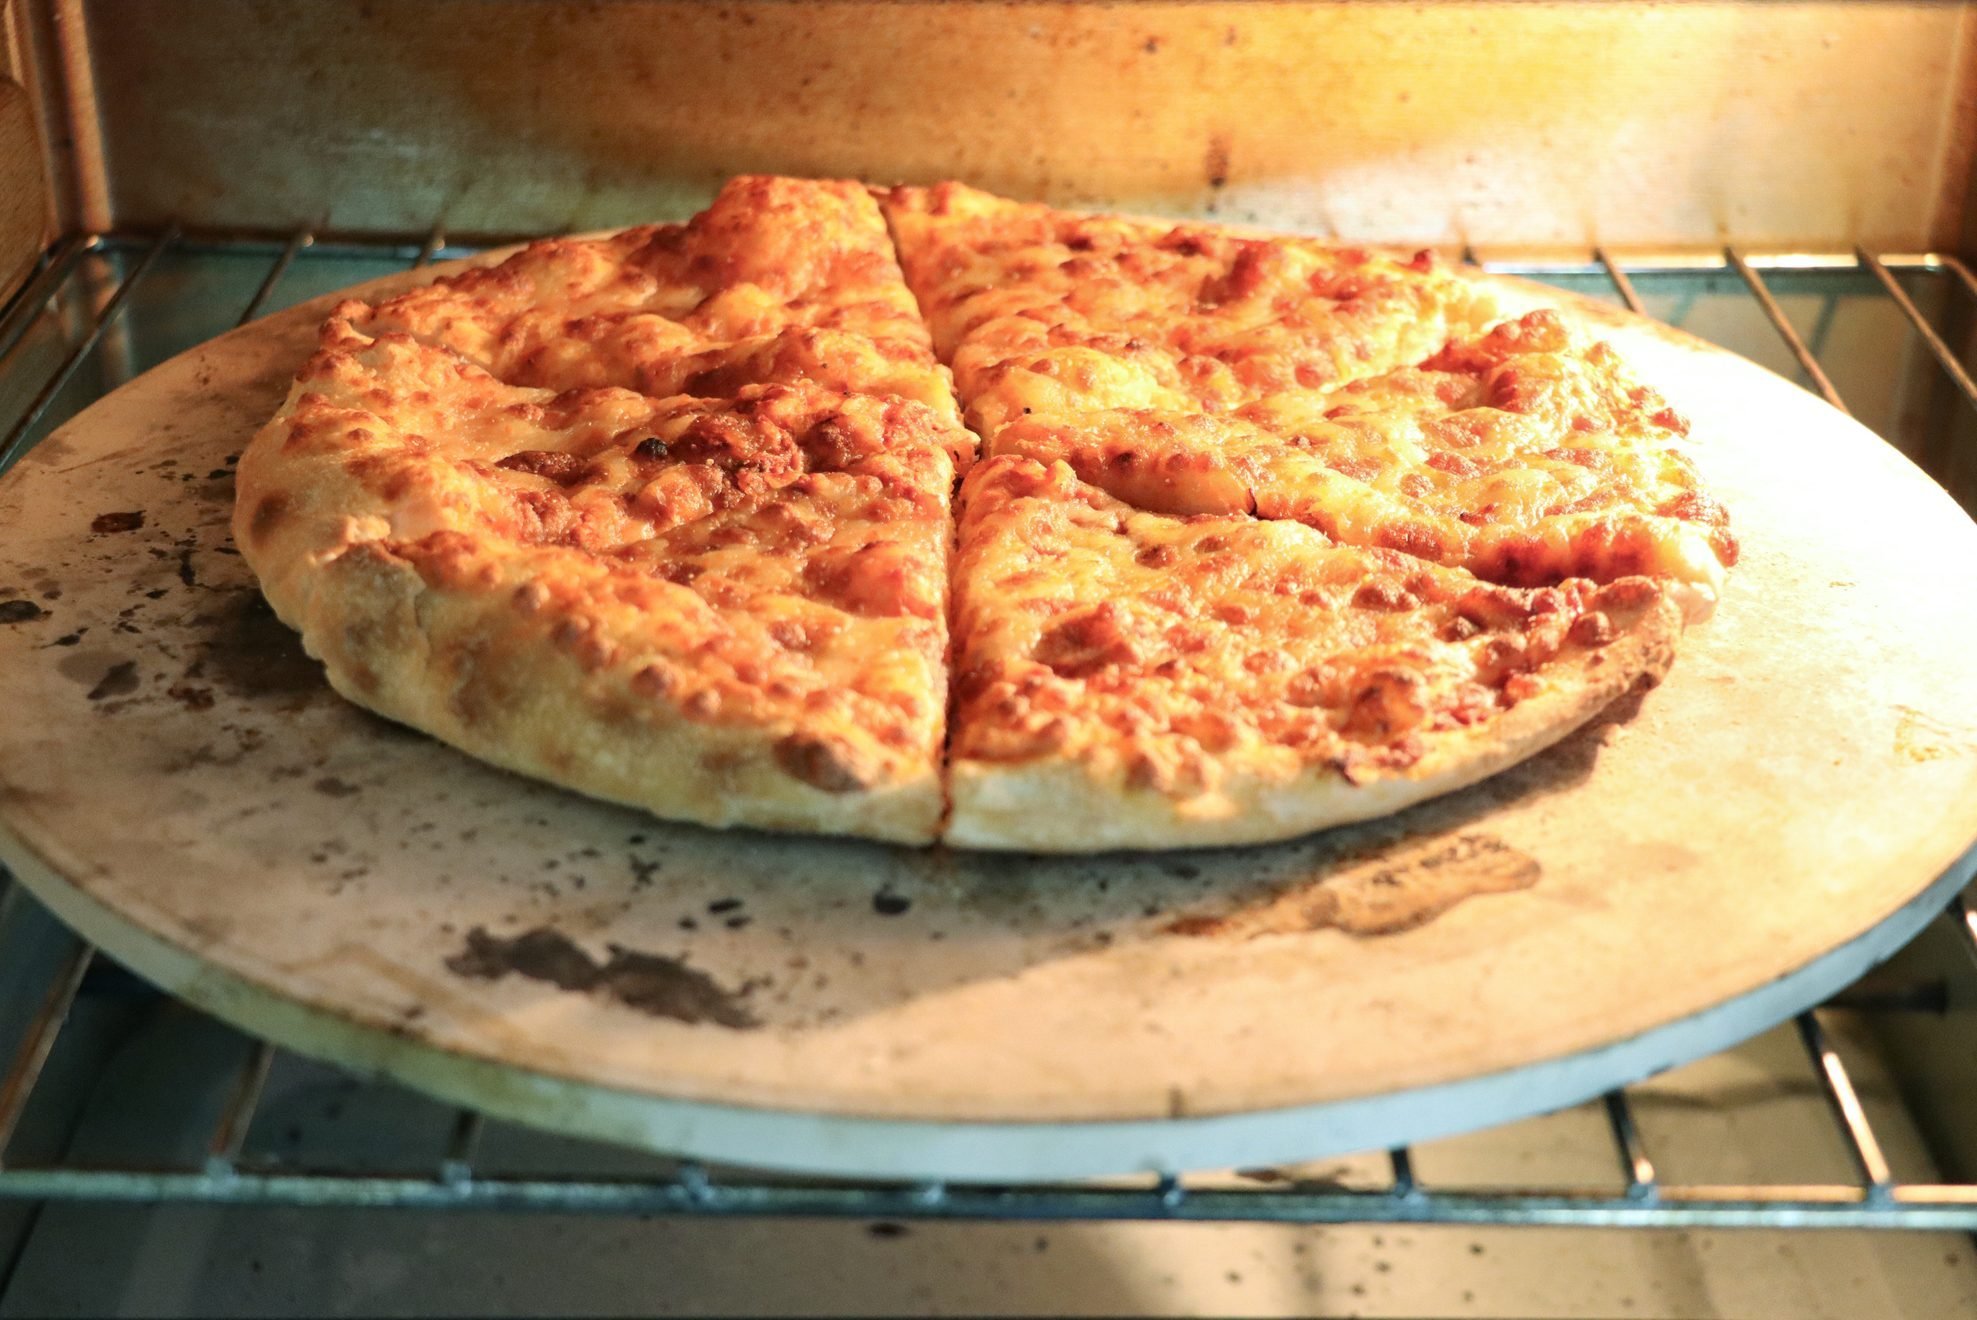 Close-up image of homemade Pizza Margherita baking in oven, cooked on pizza stone for crispy base, grated mozzarella cheese topping, elevated view, focus on foreground